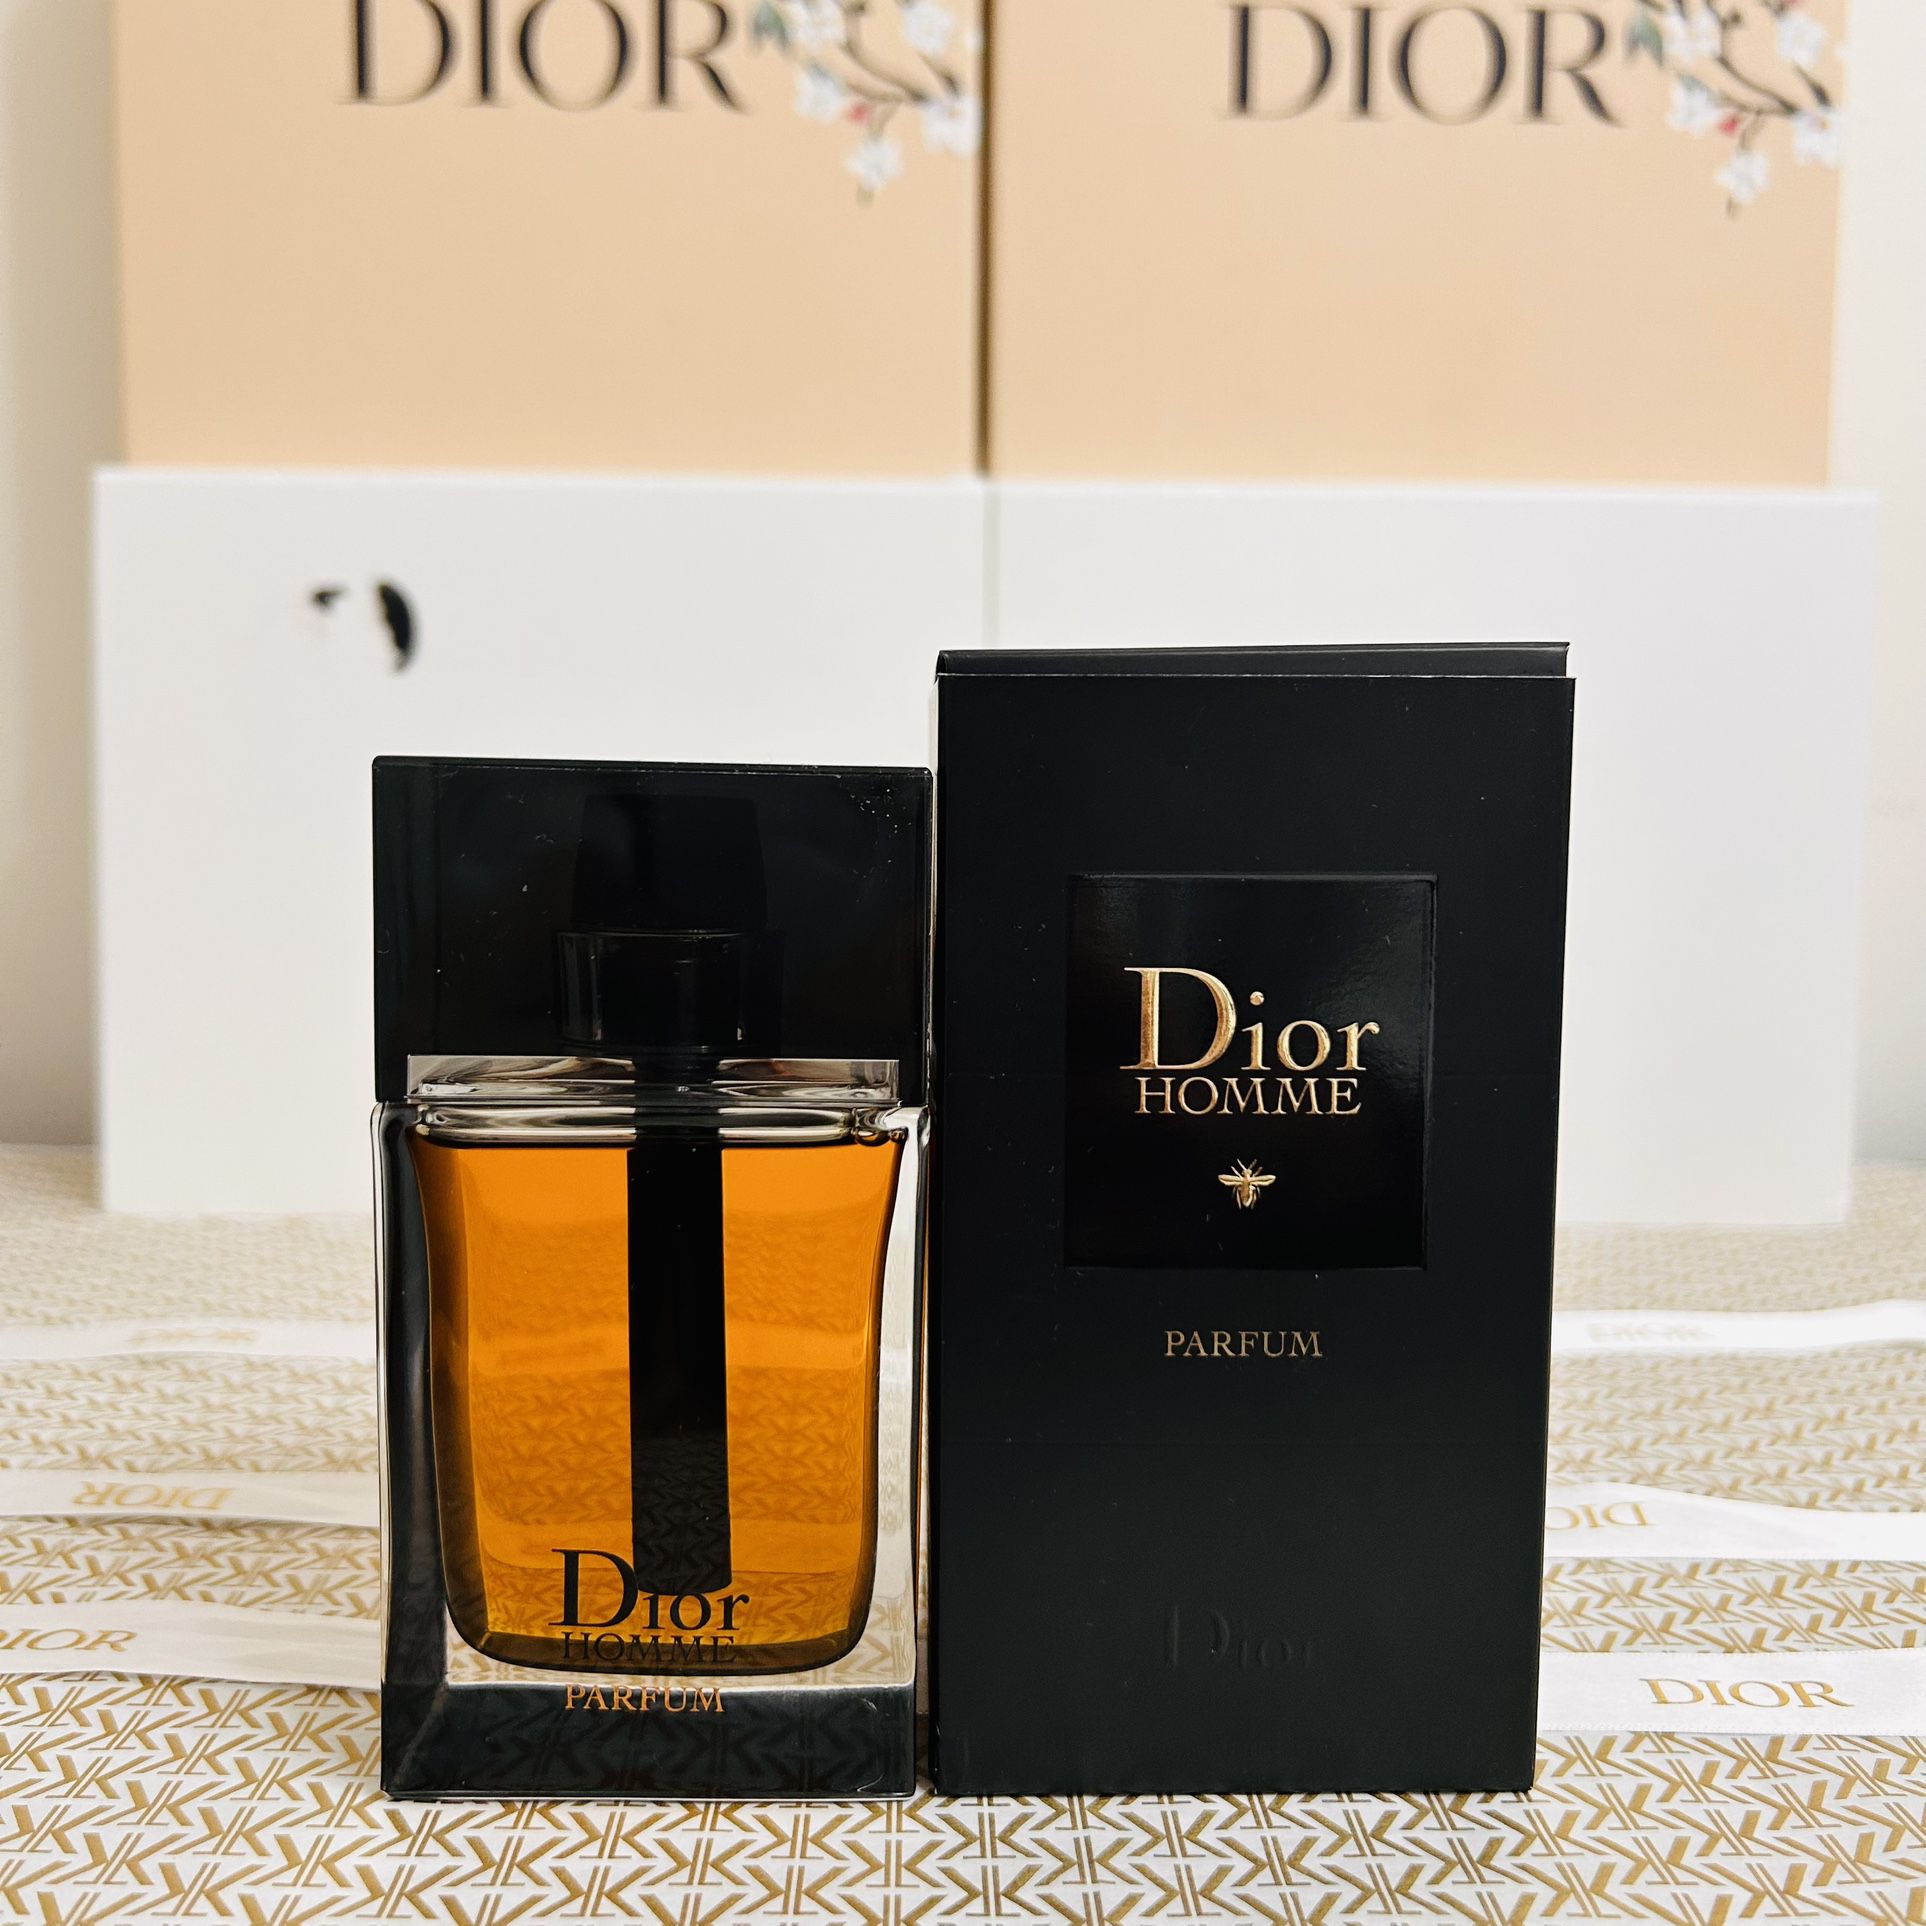 Dior Homme 100ml for Sale in Los Angeles, CA - OfferUp